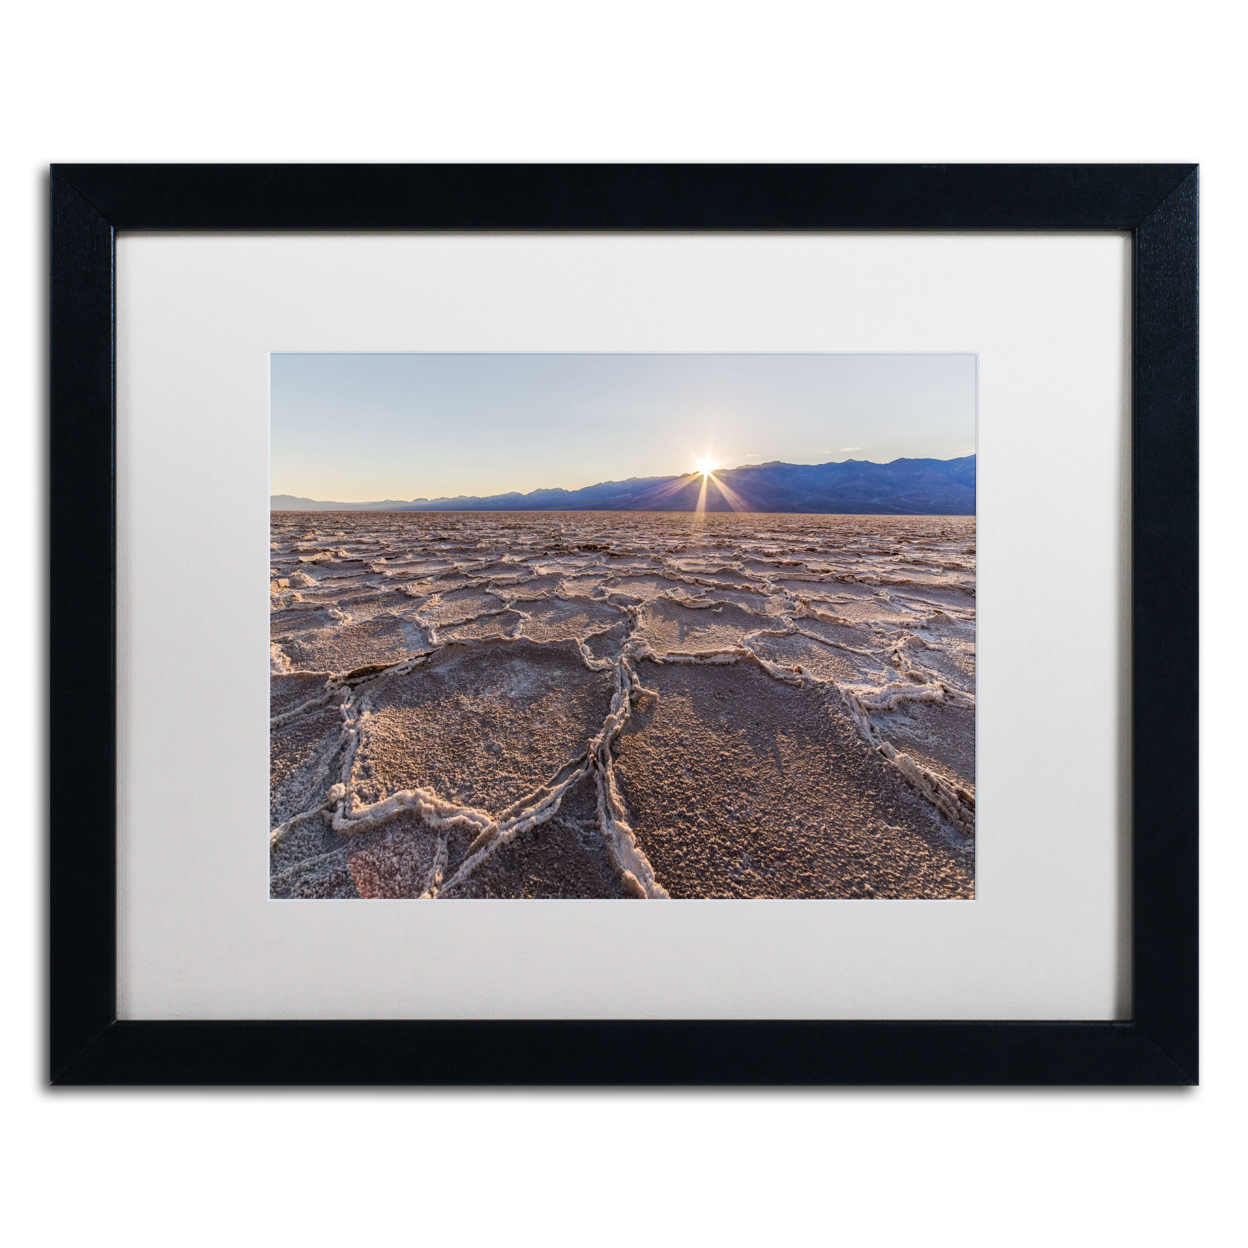 Pierre Leclerc 'Badwater Sunset' Black Wooden Framed Art 18 X 22 Inches